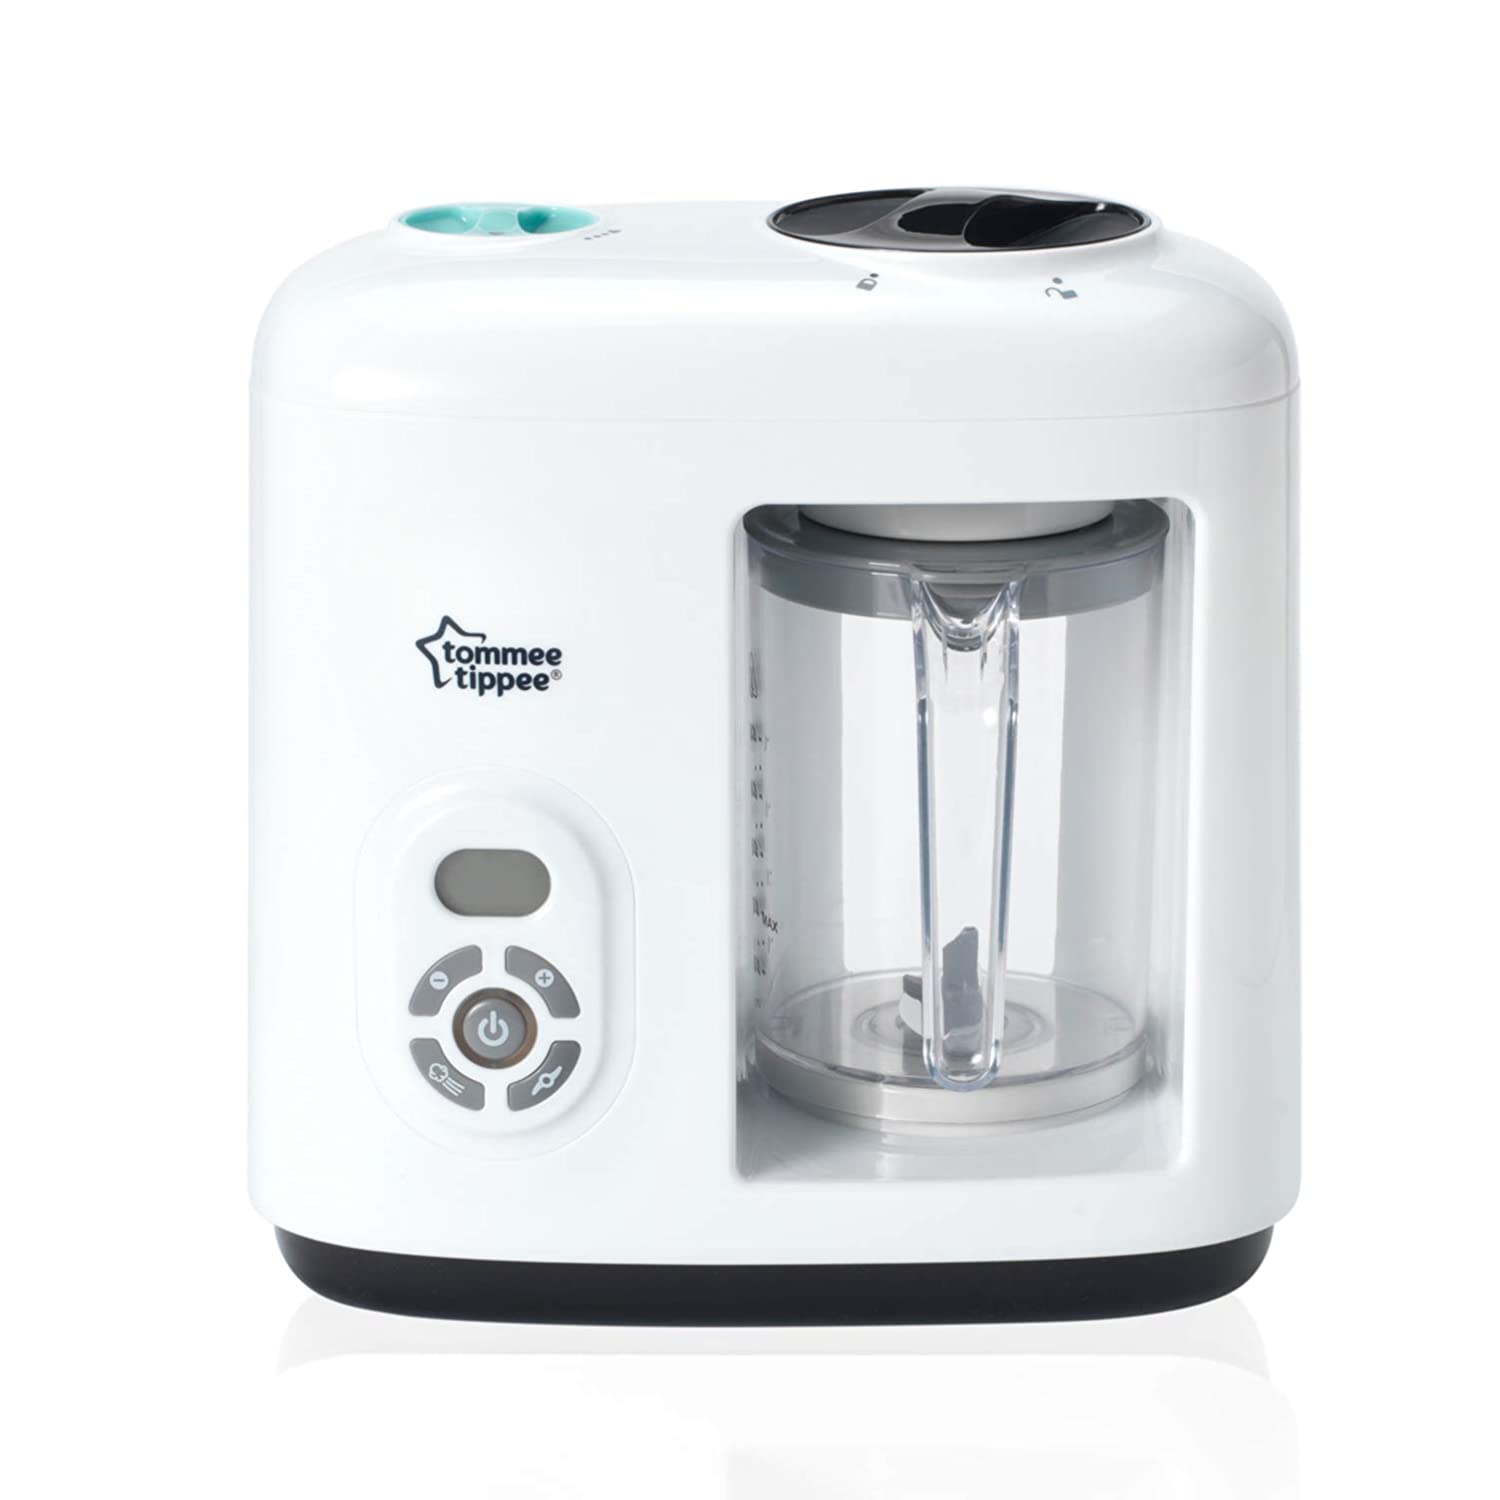 Tommee Tippee Baby Food Steamer & Mixer - White